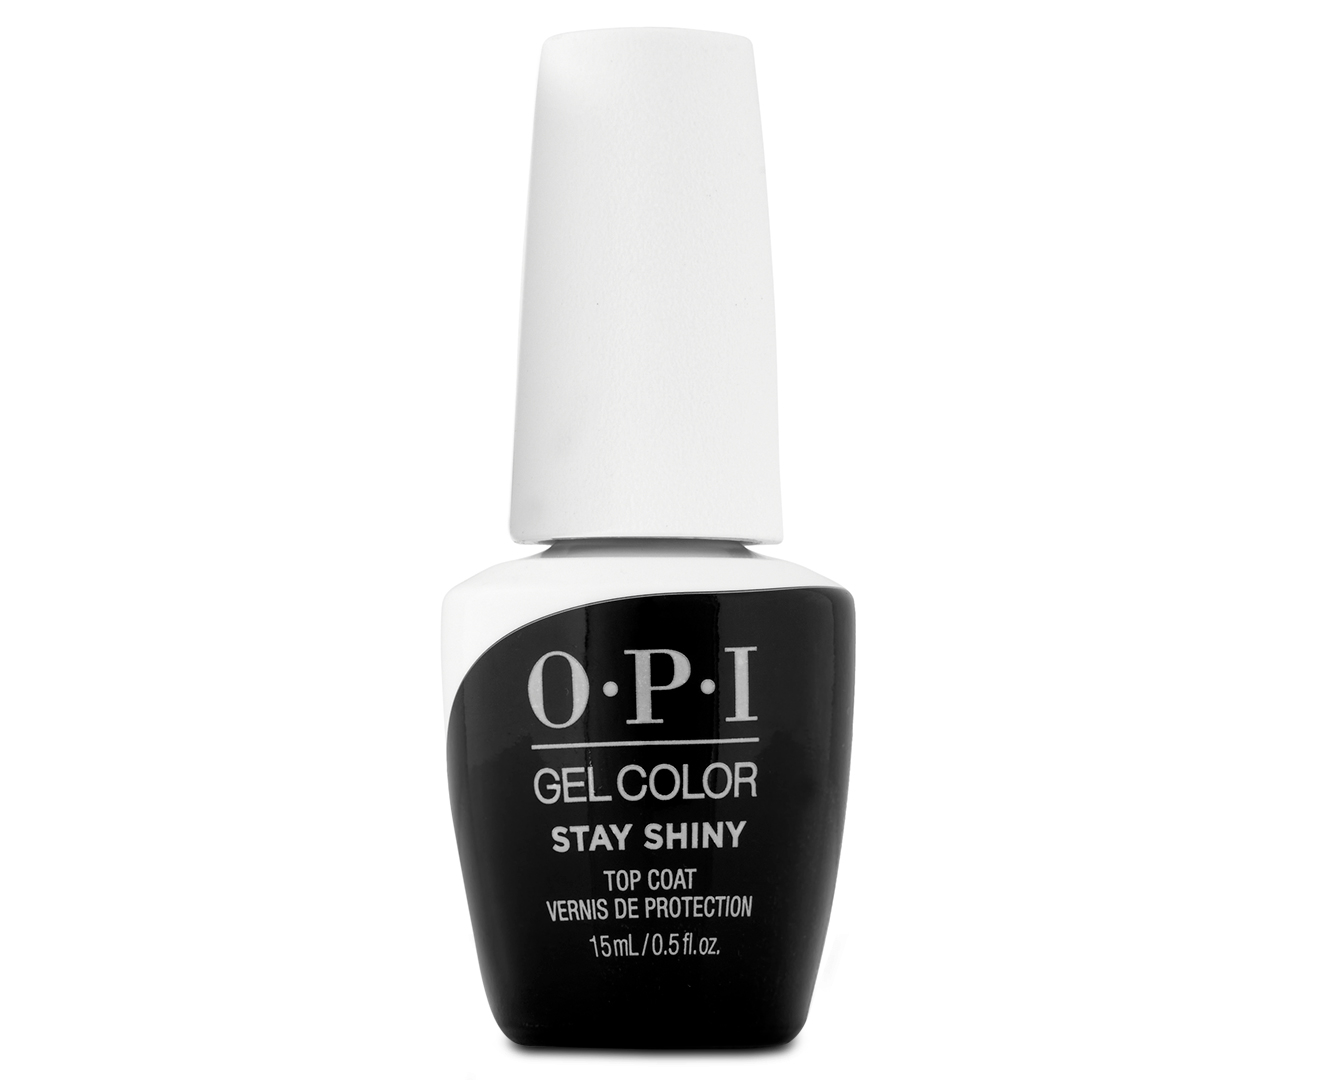 Buy cheap nail polish online from OPI, Essie and more! 